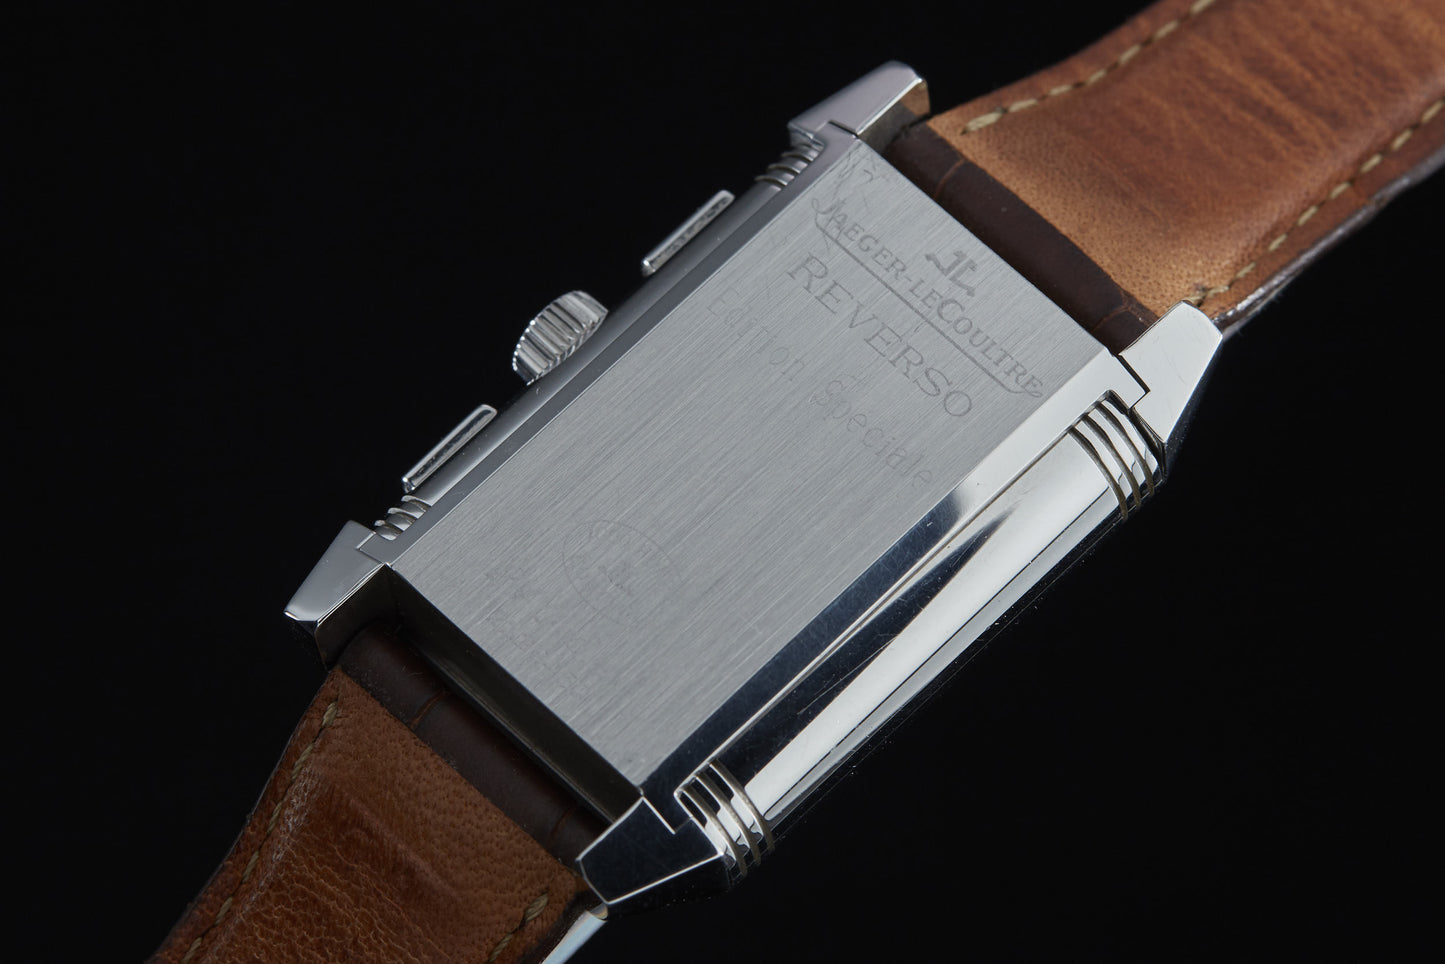 Jaeger-LeCoultre Grande Reverso GMT Duoface Special Edition